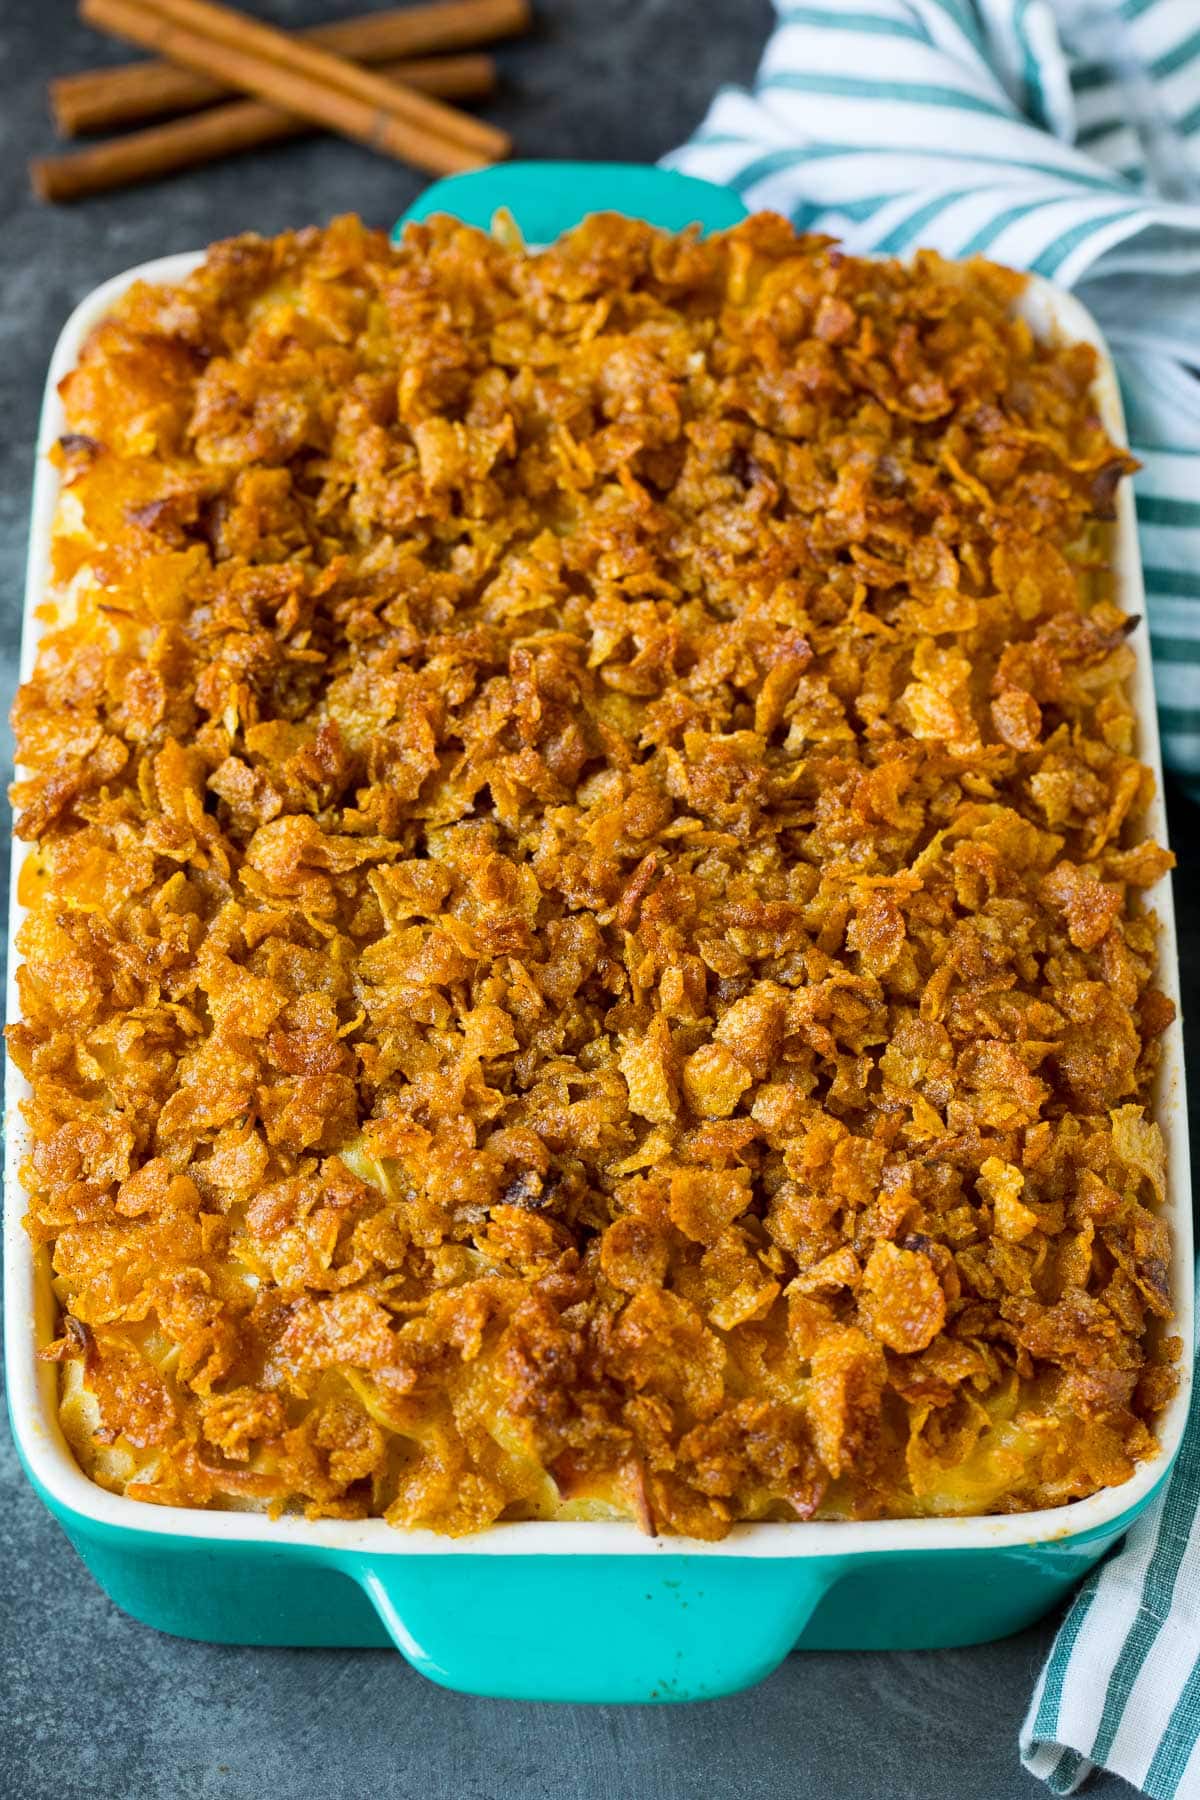 A noodle casserole baked with cornflakes on top.